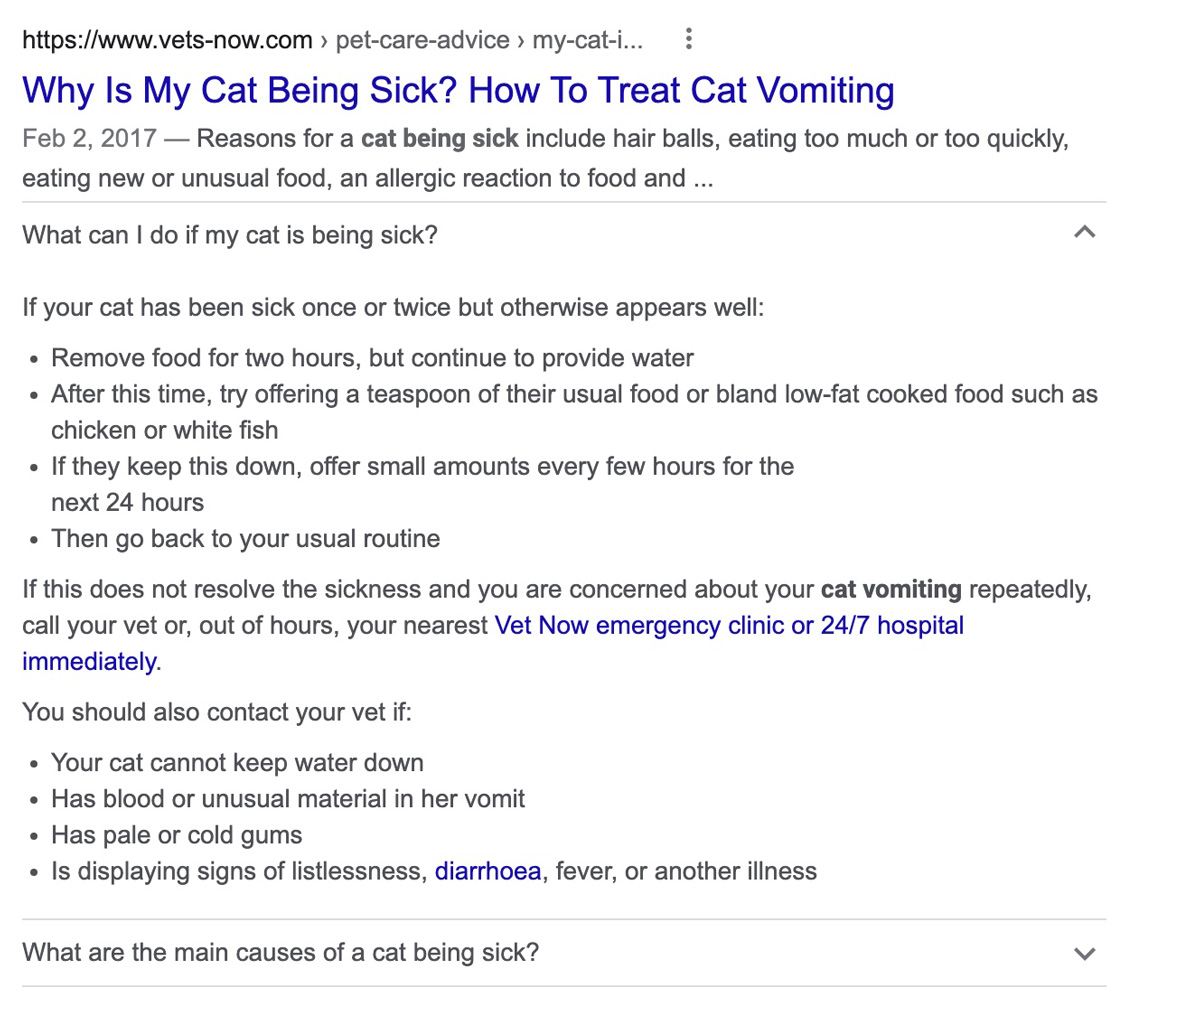 frequently asked question SERP results